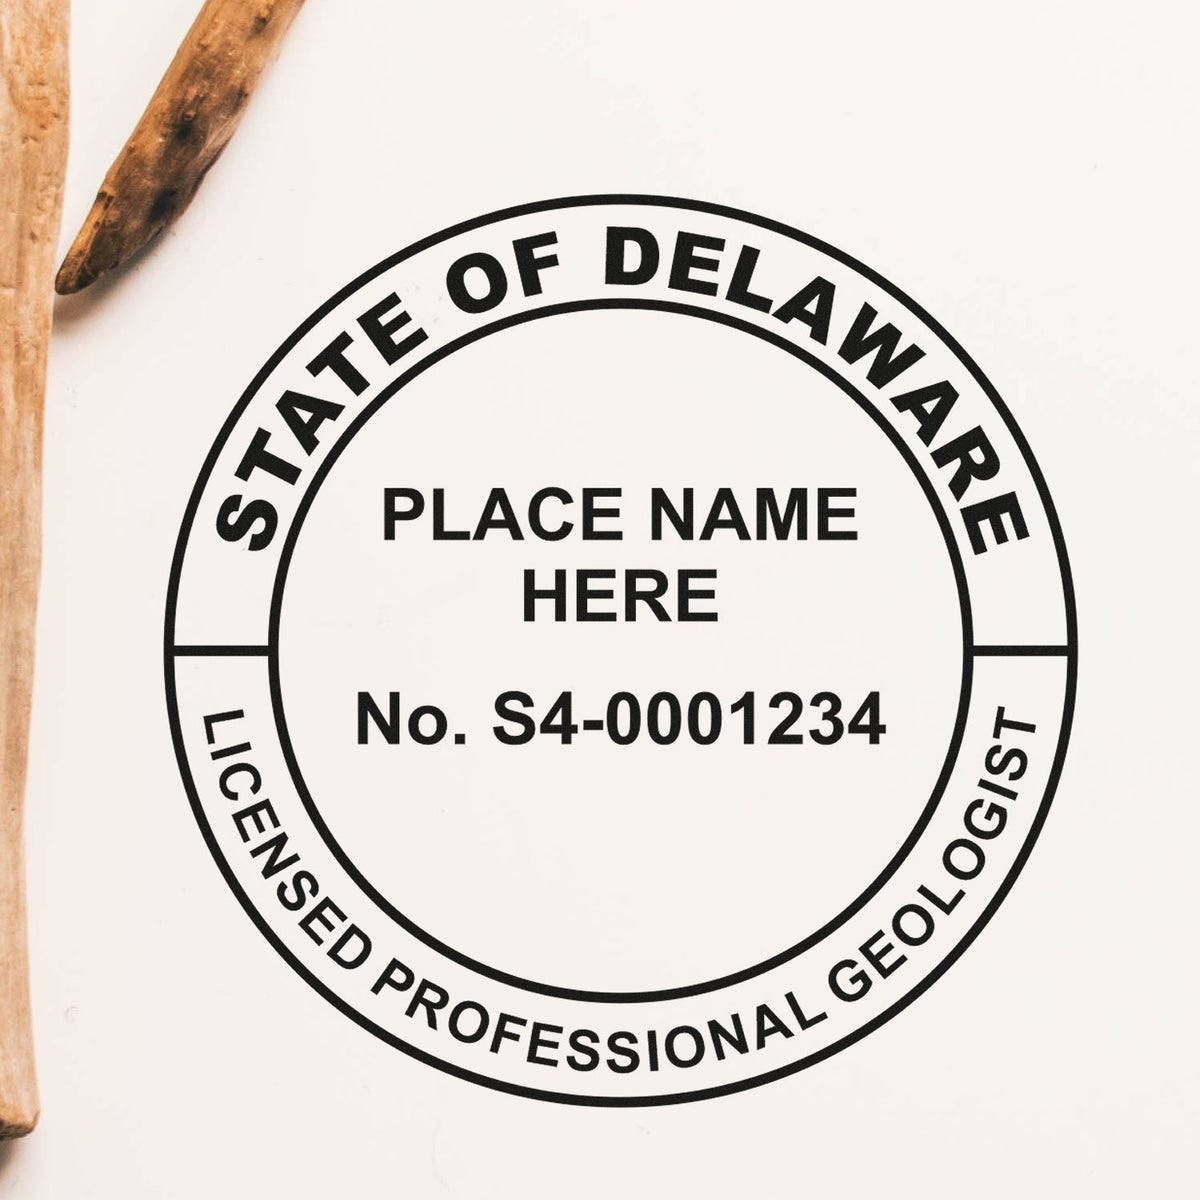 A lifestyle photo showing a stamped image of the Premium MaxLight Pre-Inked Delaware Geology Stamp on a piece of paper